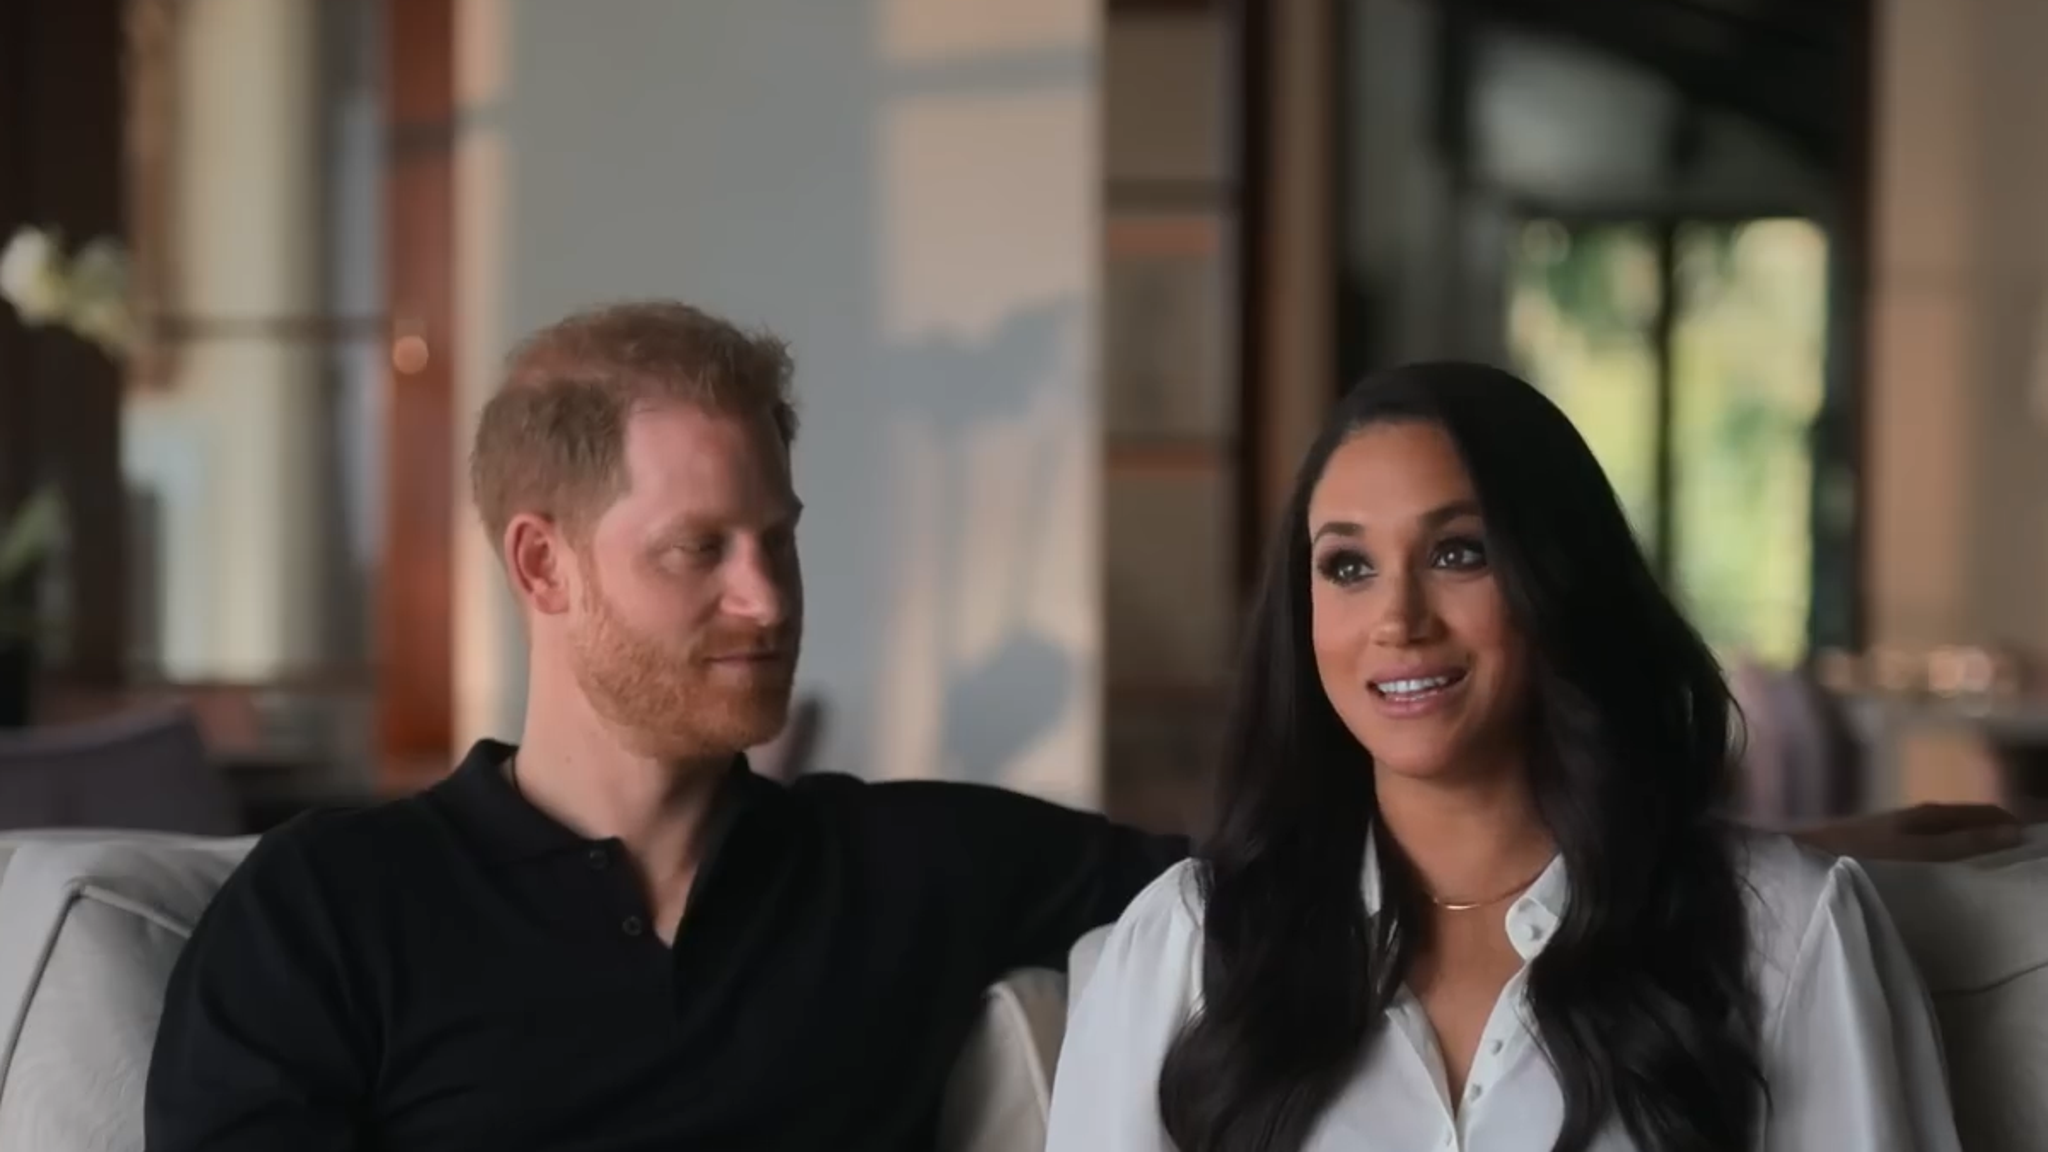 Prince Harry and Meghan Markle attack the royal family in a new trailer for a documentary